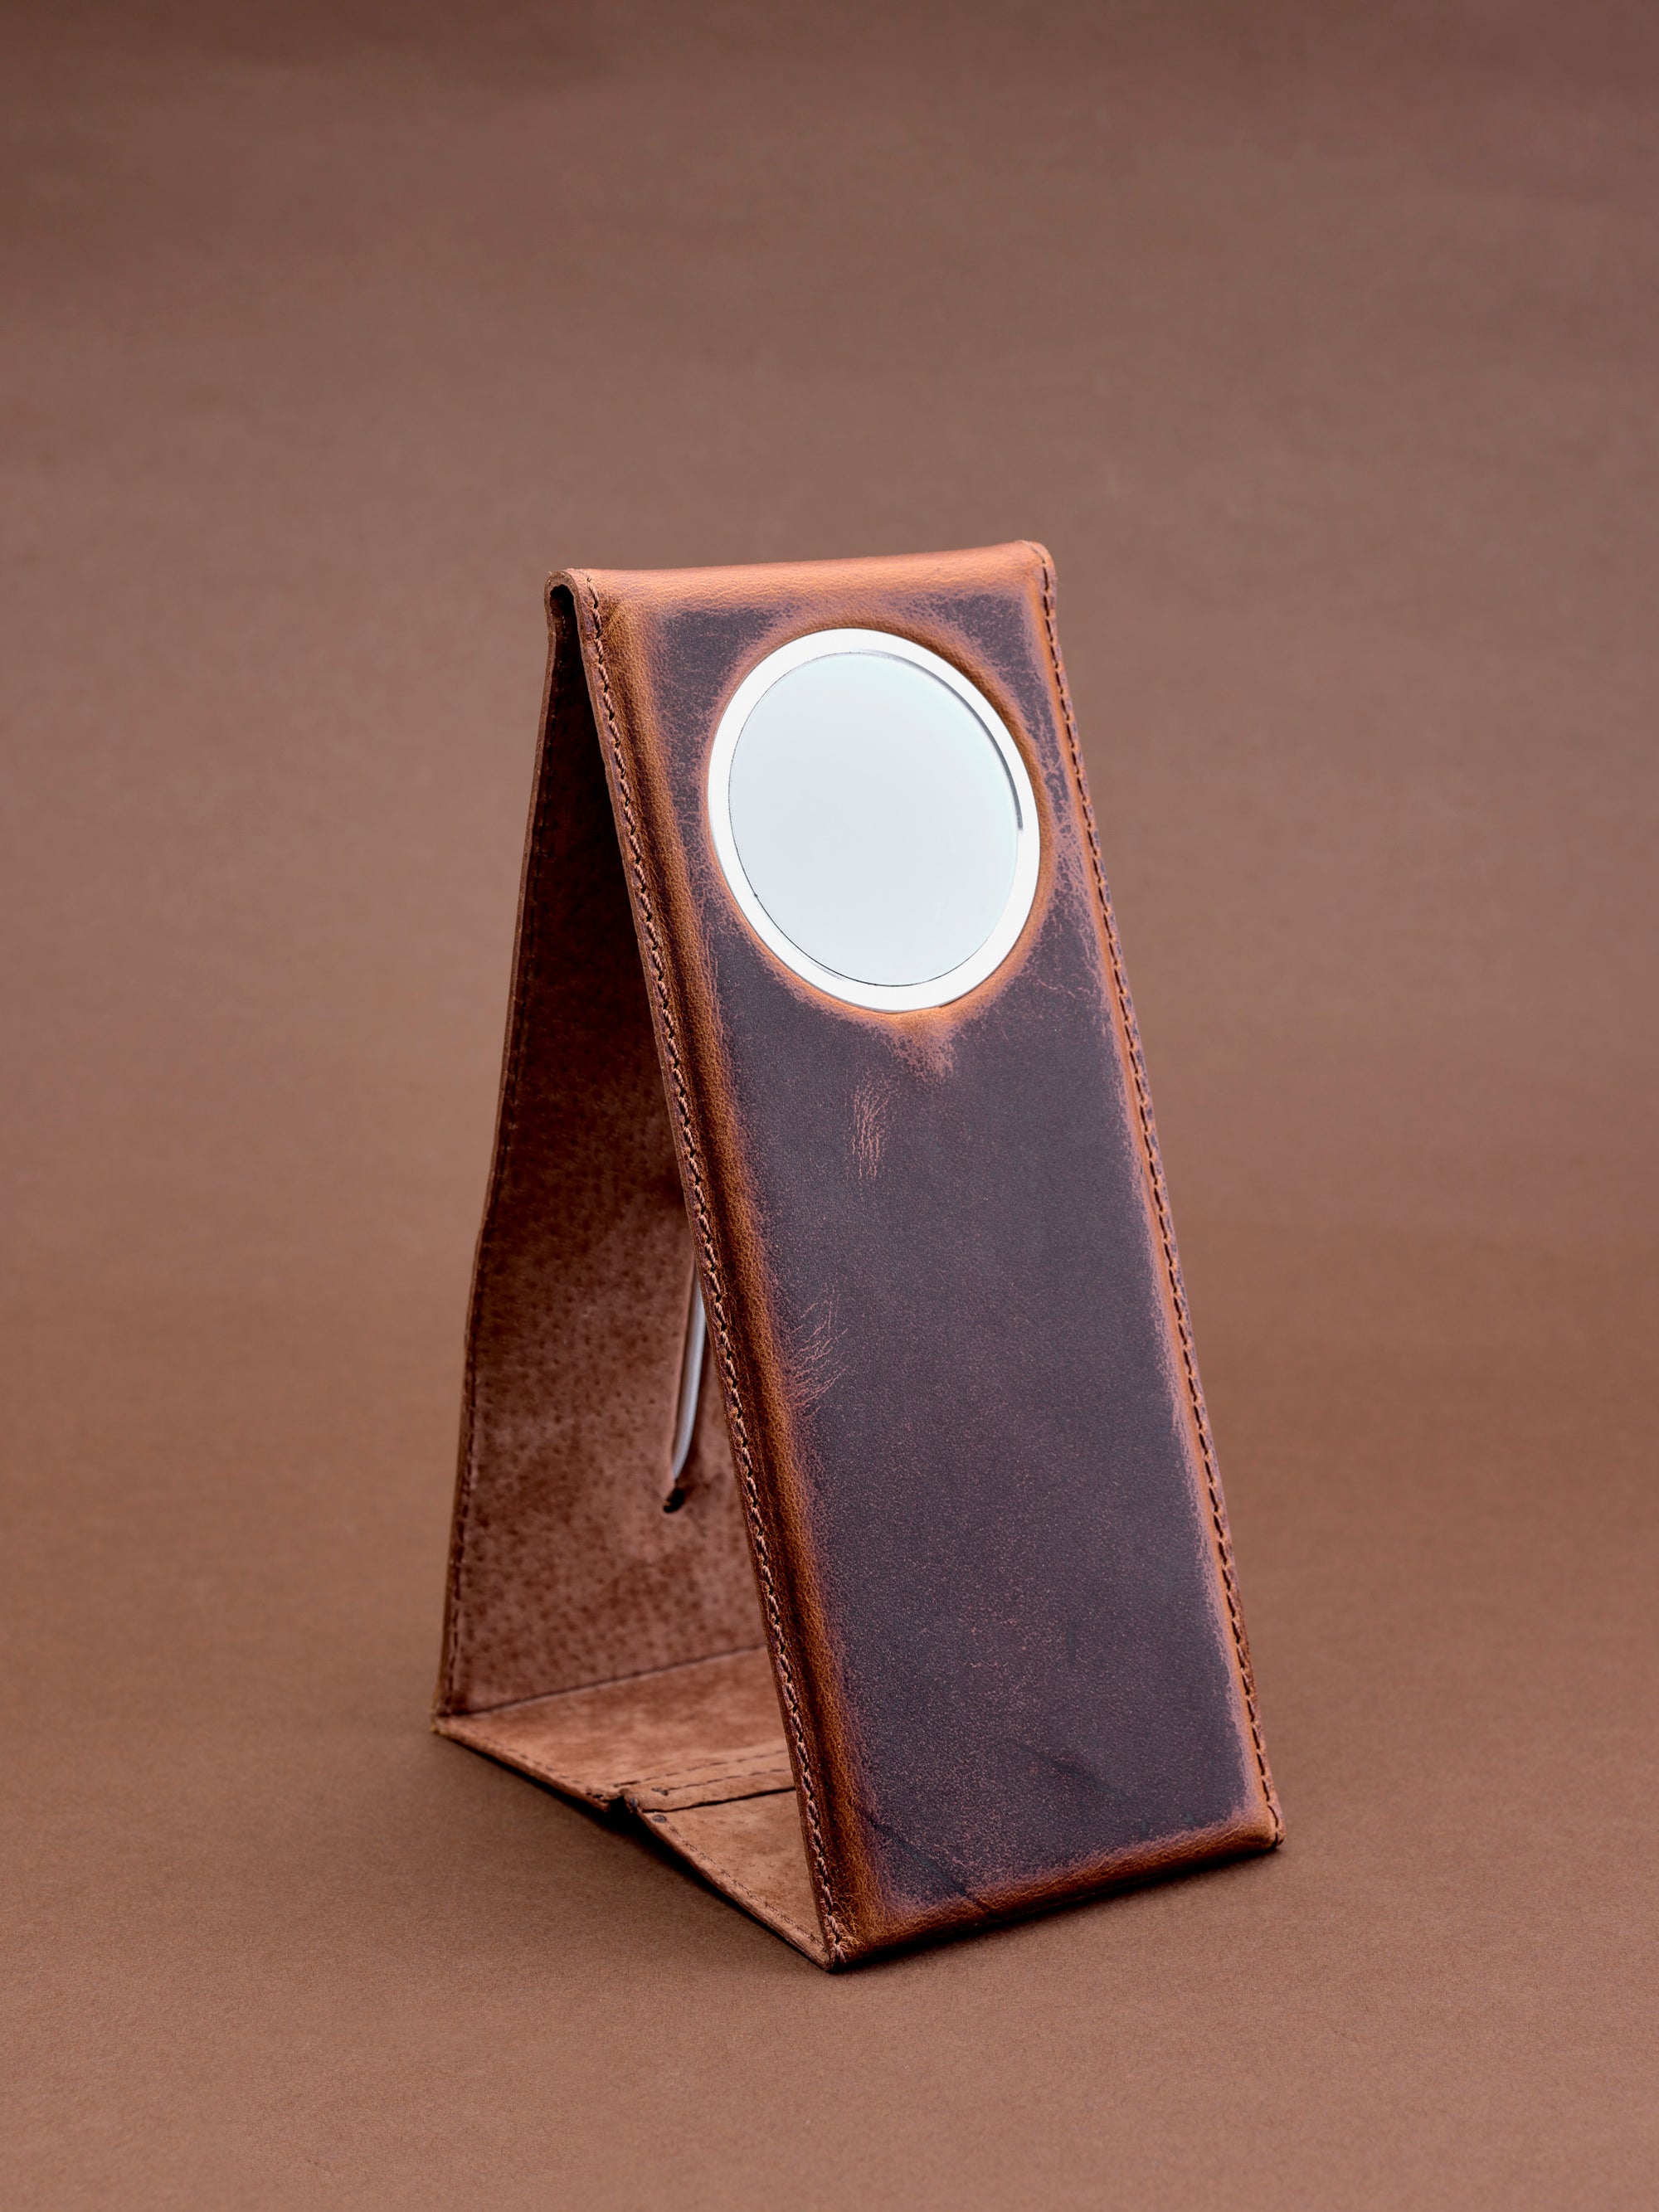 Charging stand. MagSafe iPhone Holder Stand Distressed Tan by Capra Leather